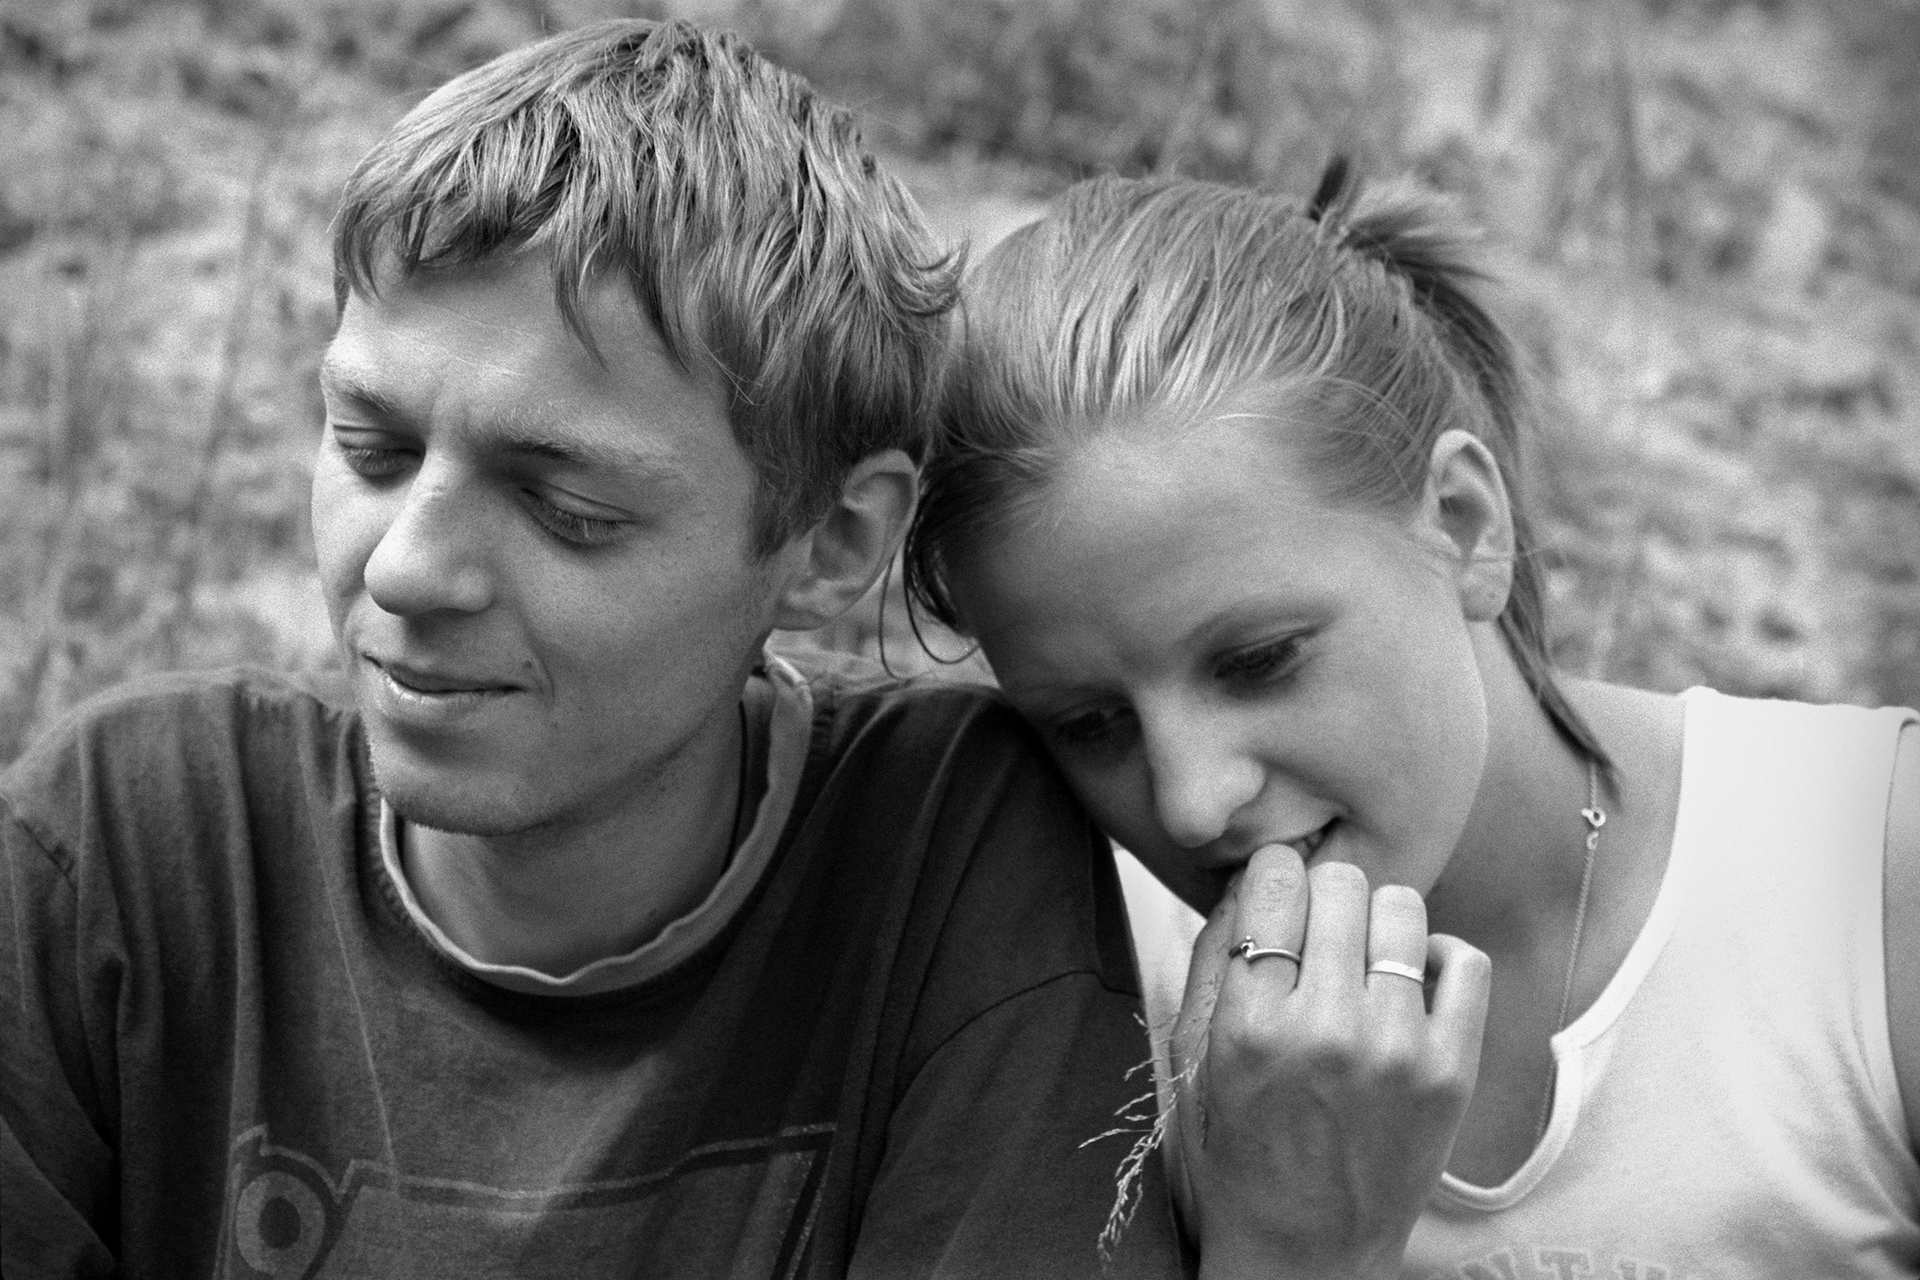 The Youth, village of Pogost, Pudozh district, Karelia, Russia (2007)